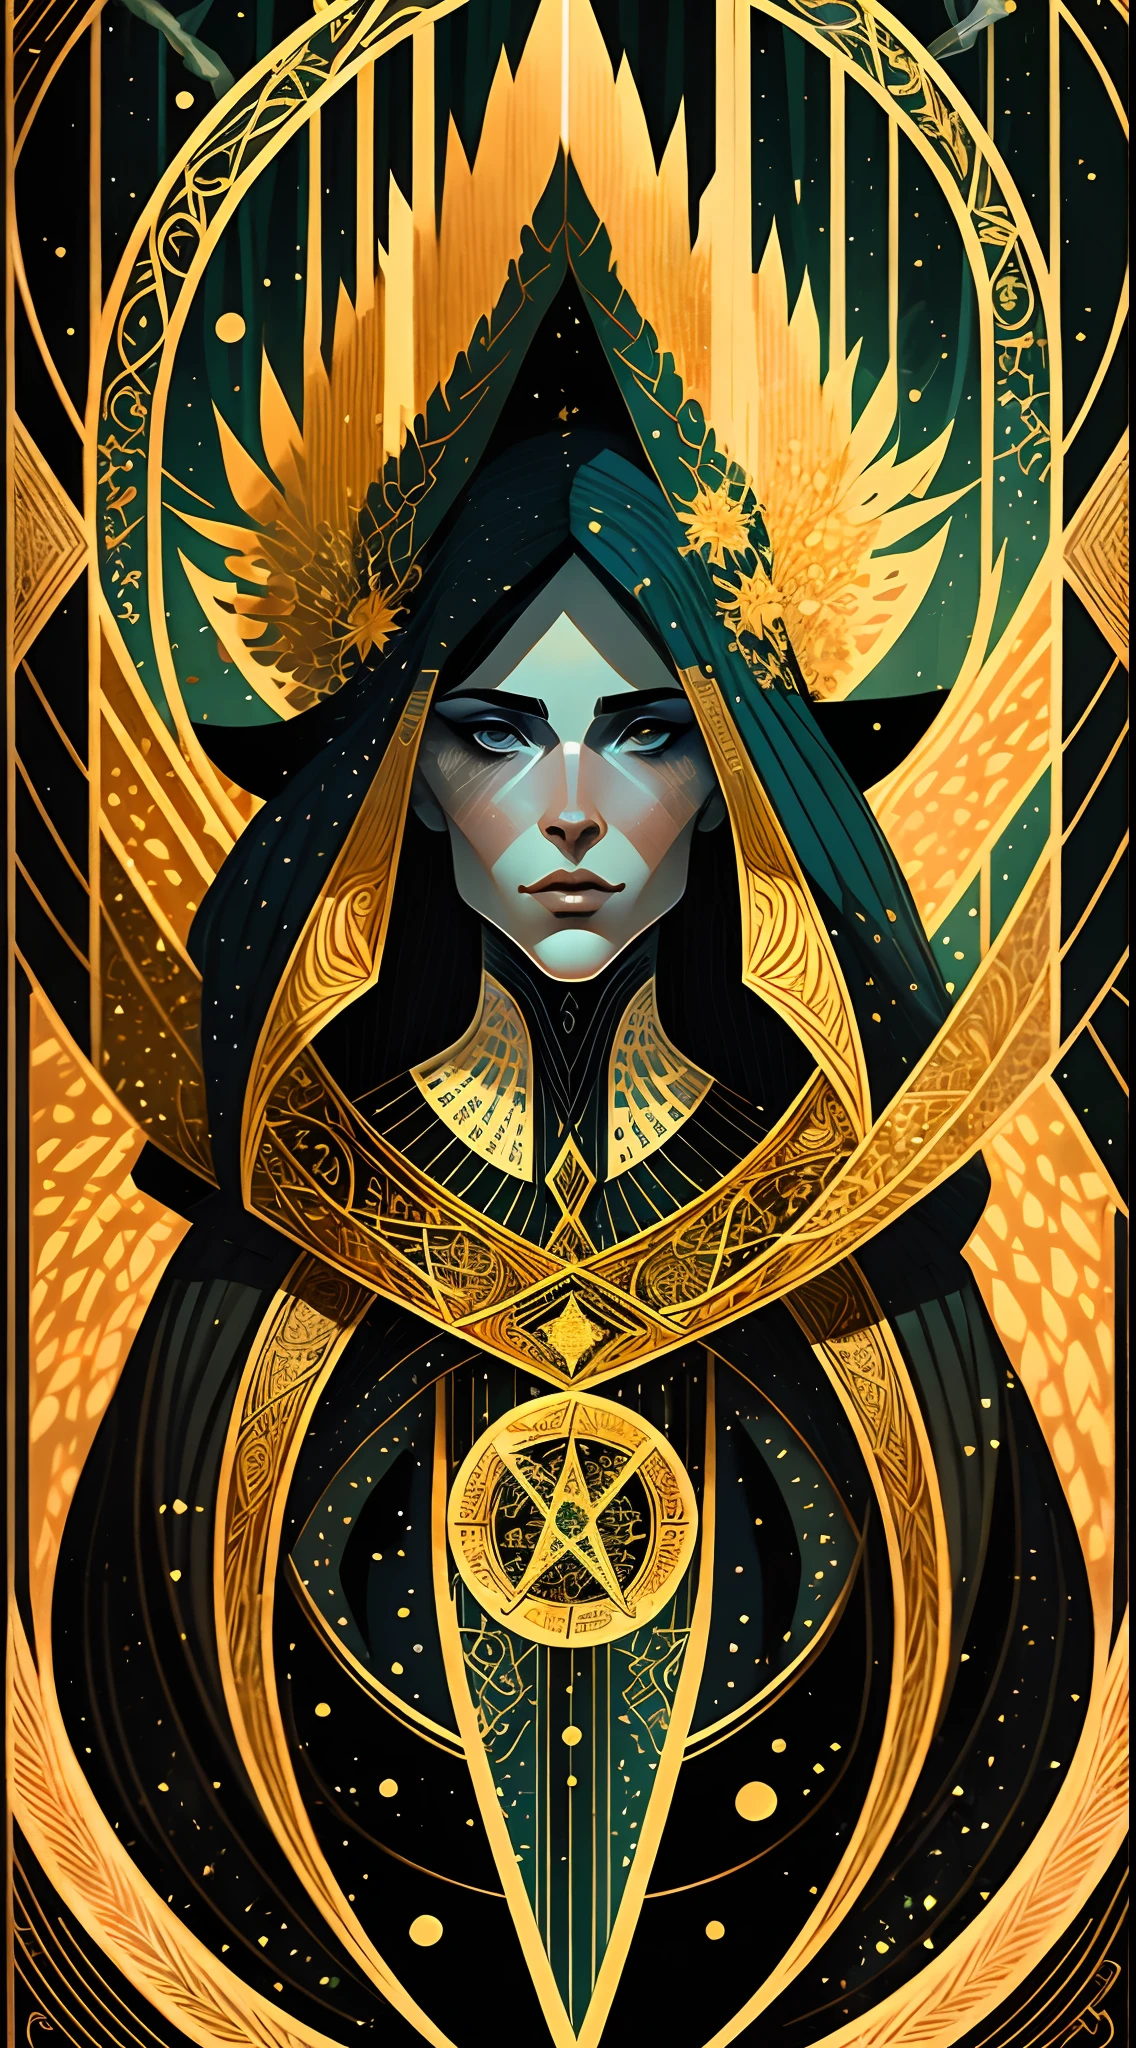 Asymmetrical Tarot 512
Use illustrations
The [ Sexy | Curvy | Beautiful ]
[ Muse | Goddess | Witch ]
, A masterpiece of Excandescent [ Kenelson's | Anne Basherier] Exodus
In style - rust magic CCDDA art style